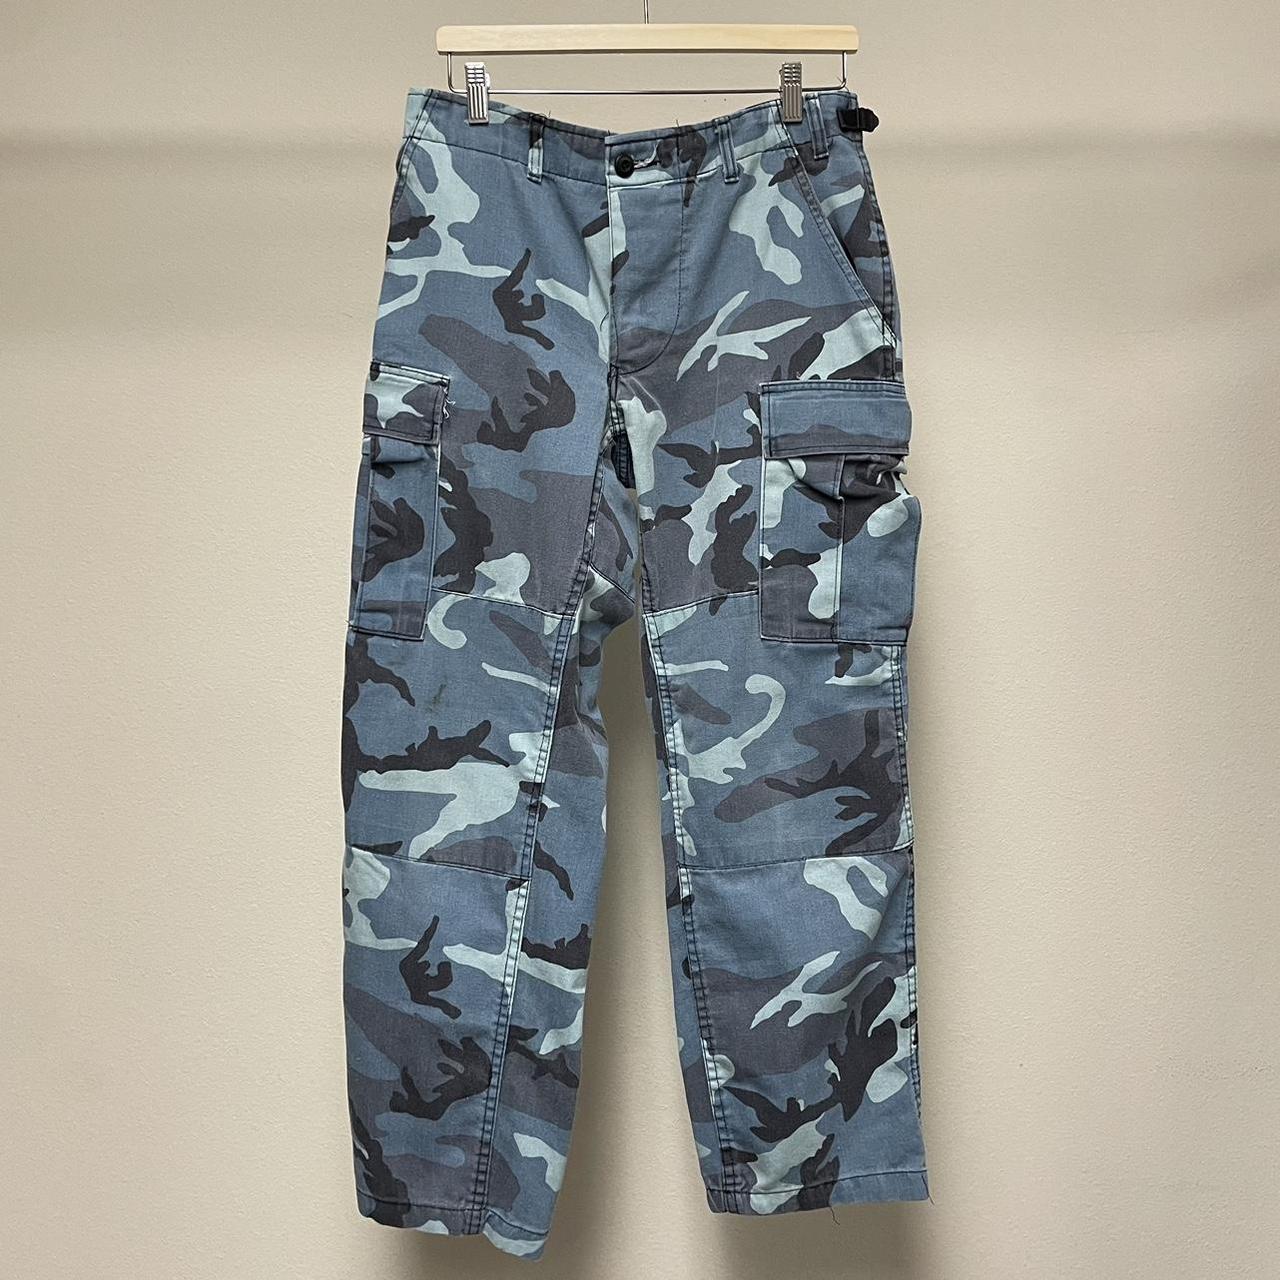 Mens Camouflage Slim Fit Jeans With Simple Print Casual And Stretchy Mens  Camo Trousers For Fashionable Men Style 229u From Dw216, $24.83 | DHgate.Com